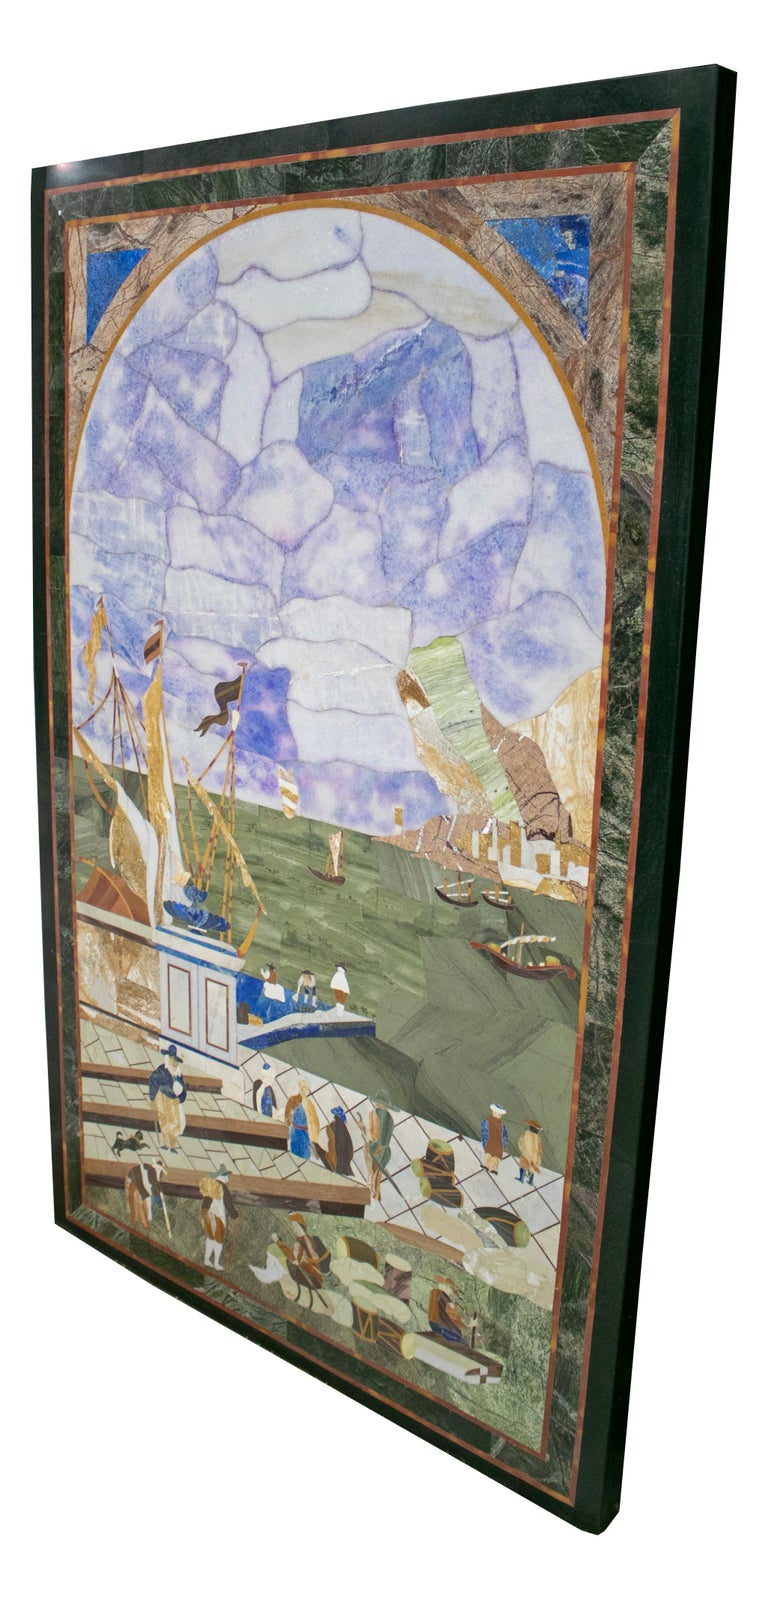 Rectangular mosaic table top with marina scene drawn using Italian Piaetra Dura inlay, including blue lapis lazuli and other semiprecious stones and marbles.